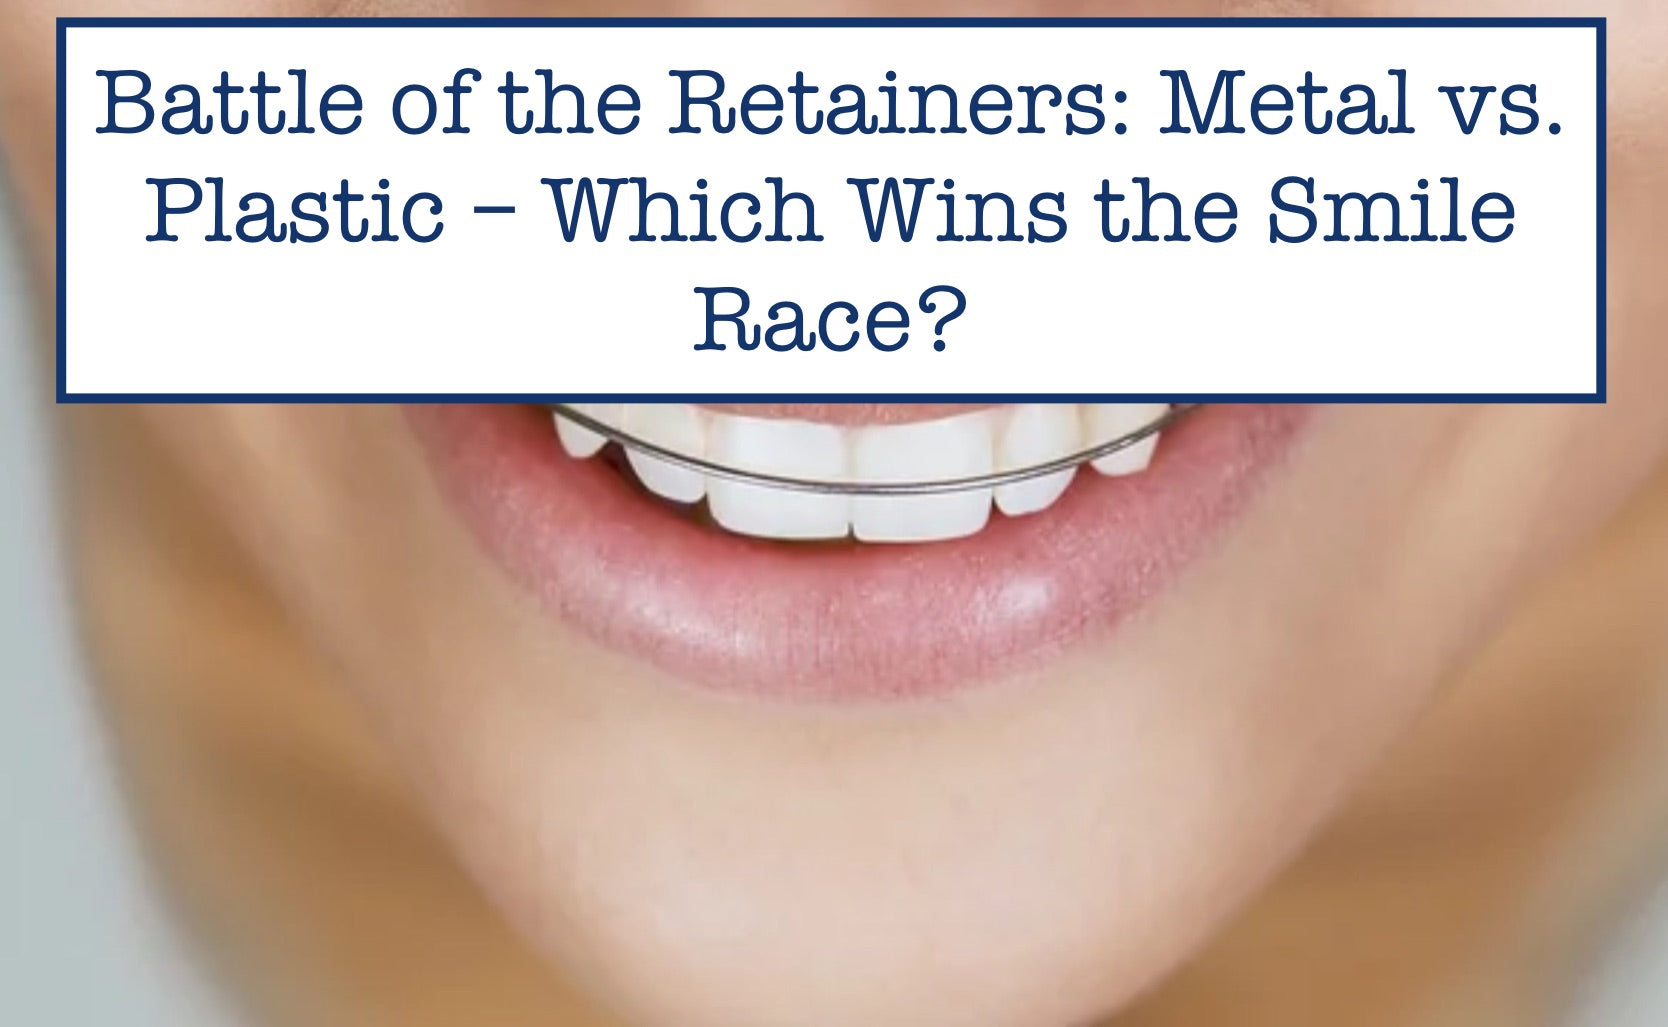 Battle of the Retainers: Metal vs. Plastic – Which Wins the Smile Race?